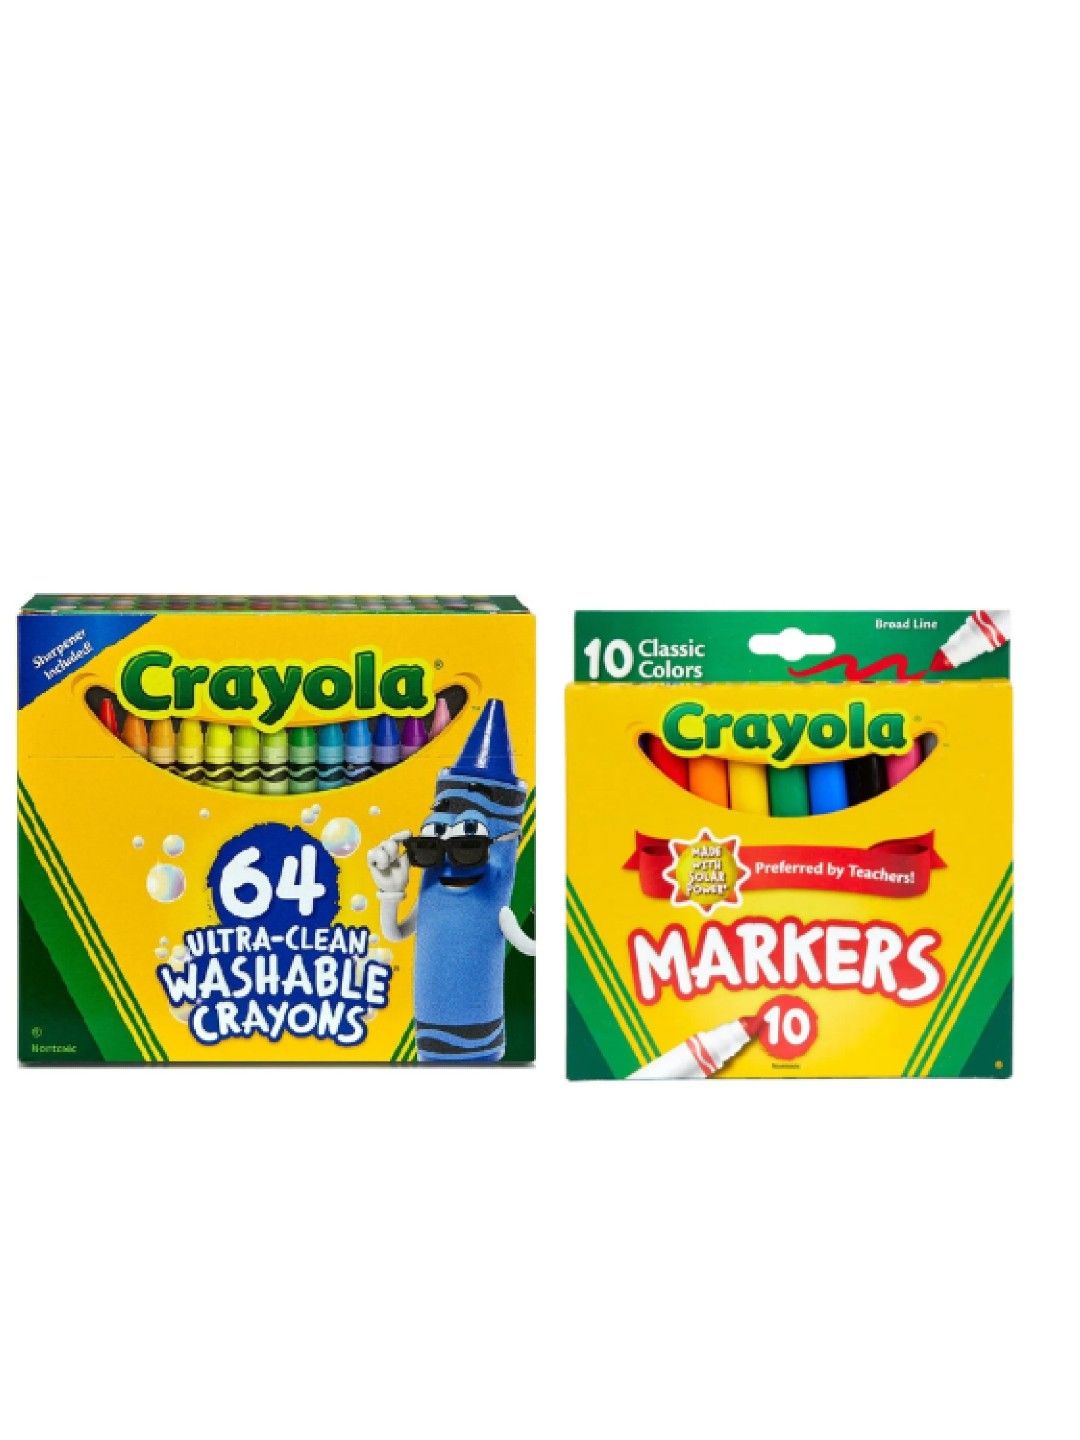 https://media-v4.edamama.ph/products/Ultra%20Clean%20Washable%20Crayons%20%2864%20Count%29%20_%20Broad%20Line%20Markers%20-%20Classic%20Colors%20%2810%20Count%29%20Bundle_1687151142118.png